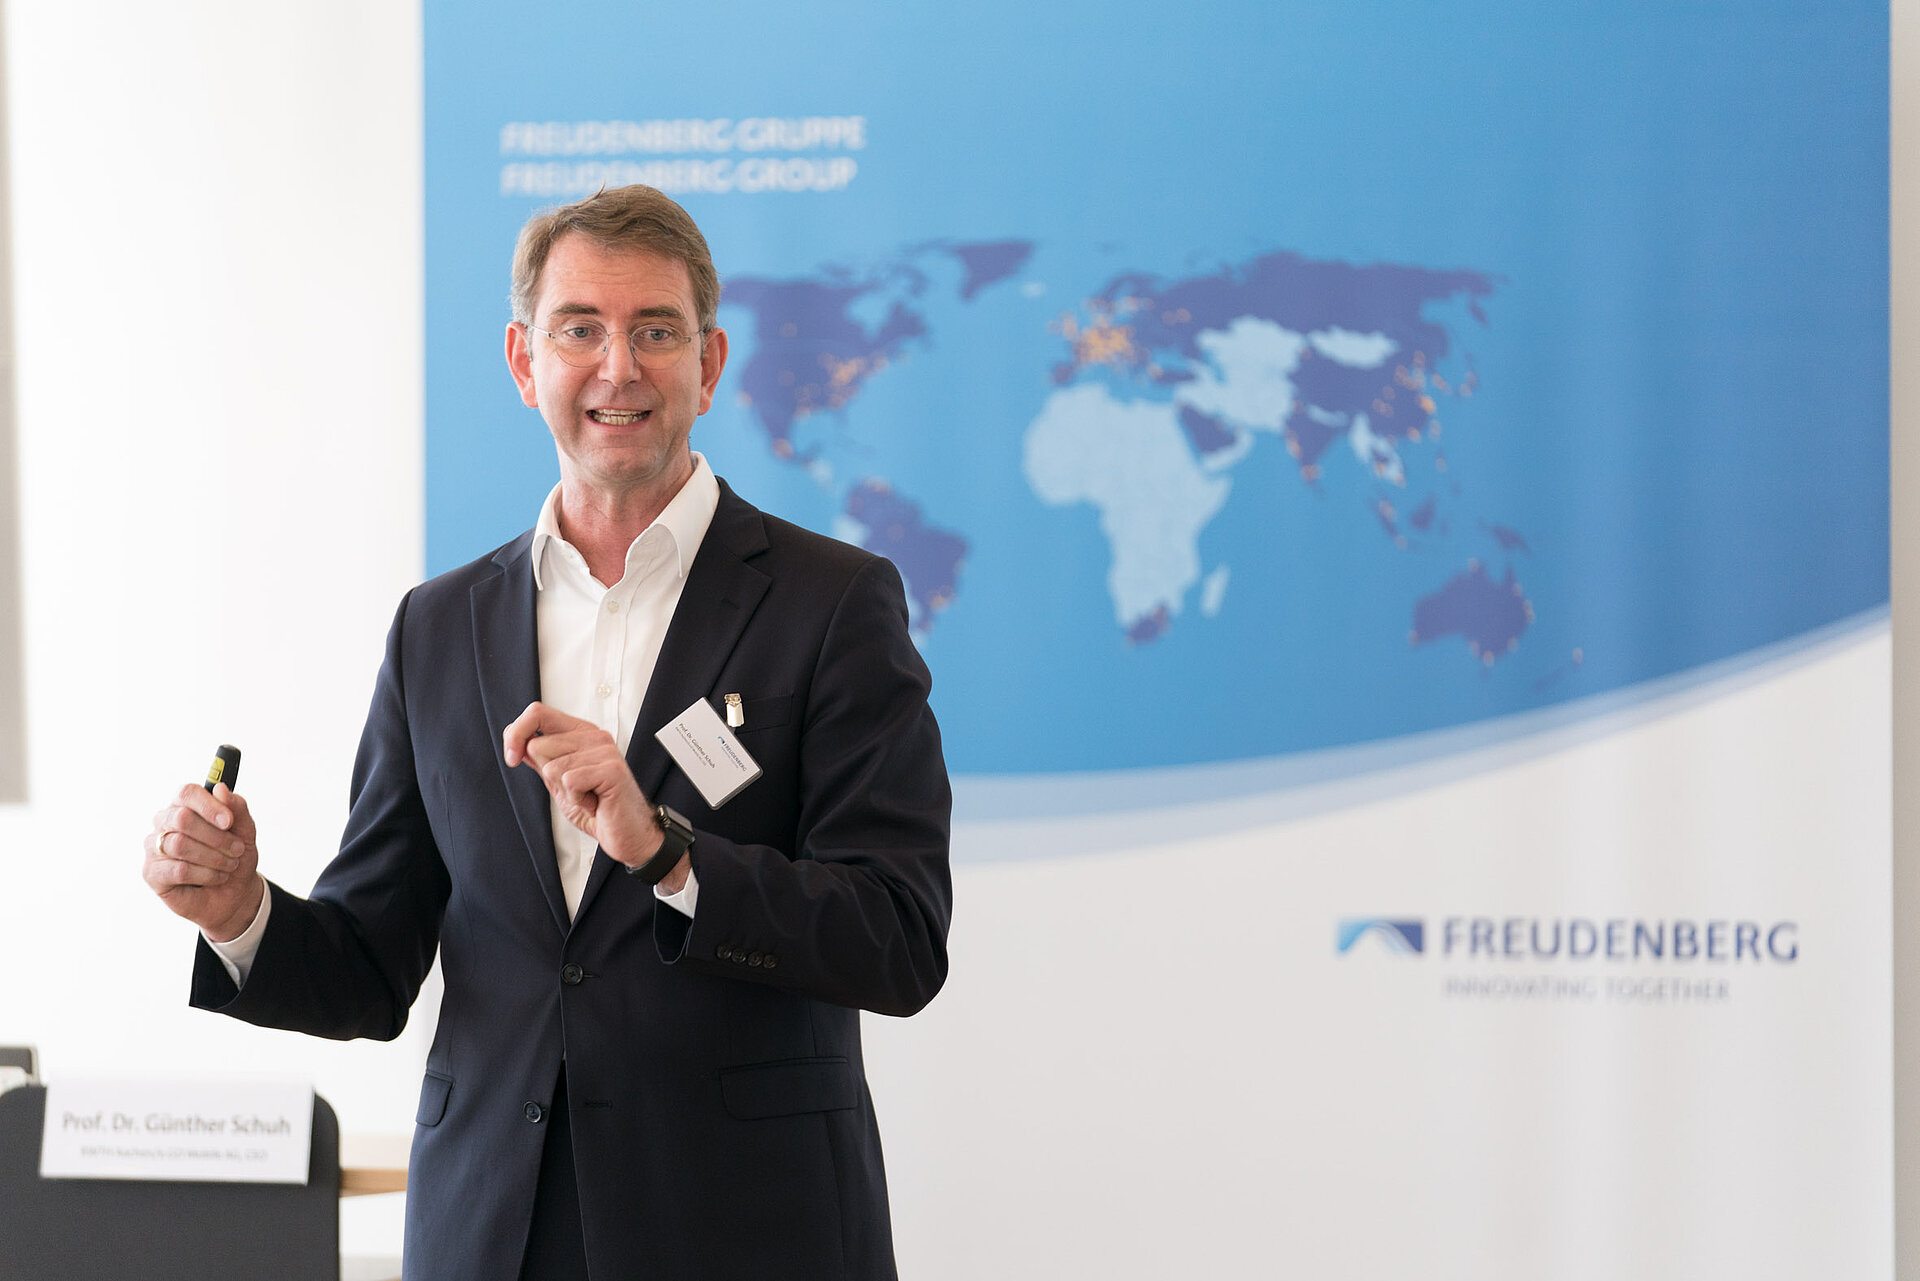 Picture of Dr. Schuh at the Freudenberg Forum